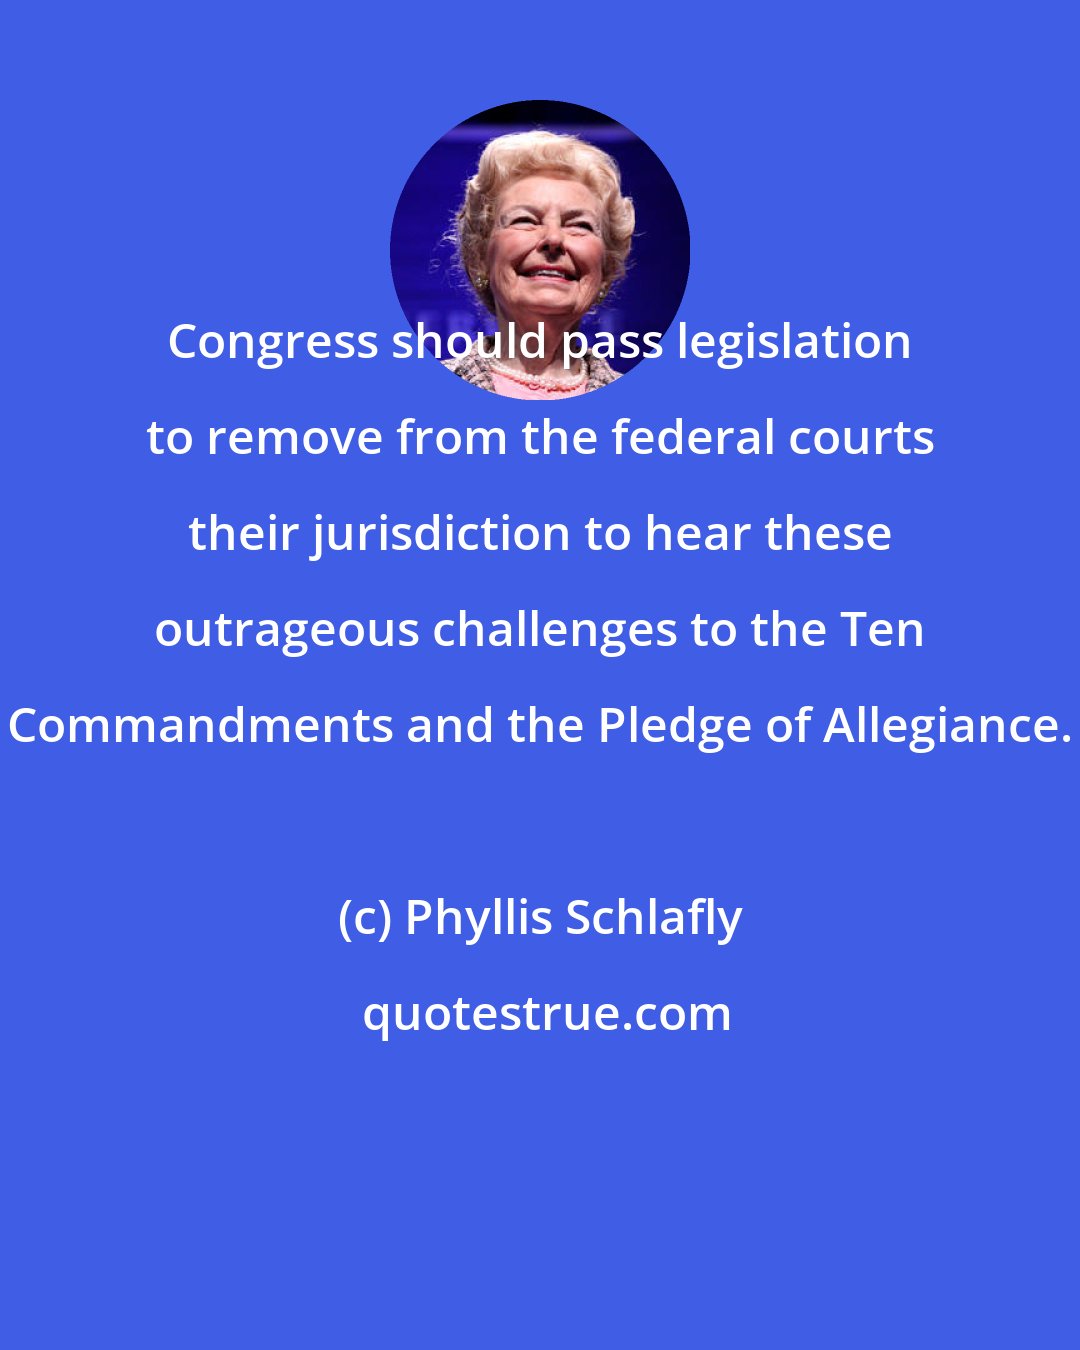 Phyllis Schlafly: Congress should pass legislation to remove from the federal courts their jurisdiction to hear these outrageous challenges to the Ten Commandments and the Pledge of Allegiance.